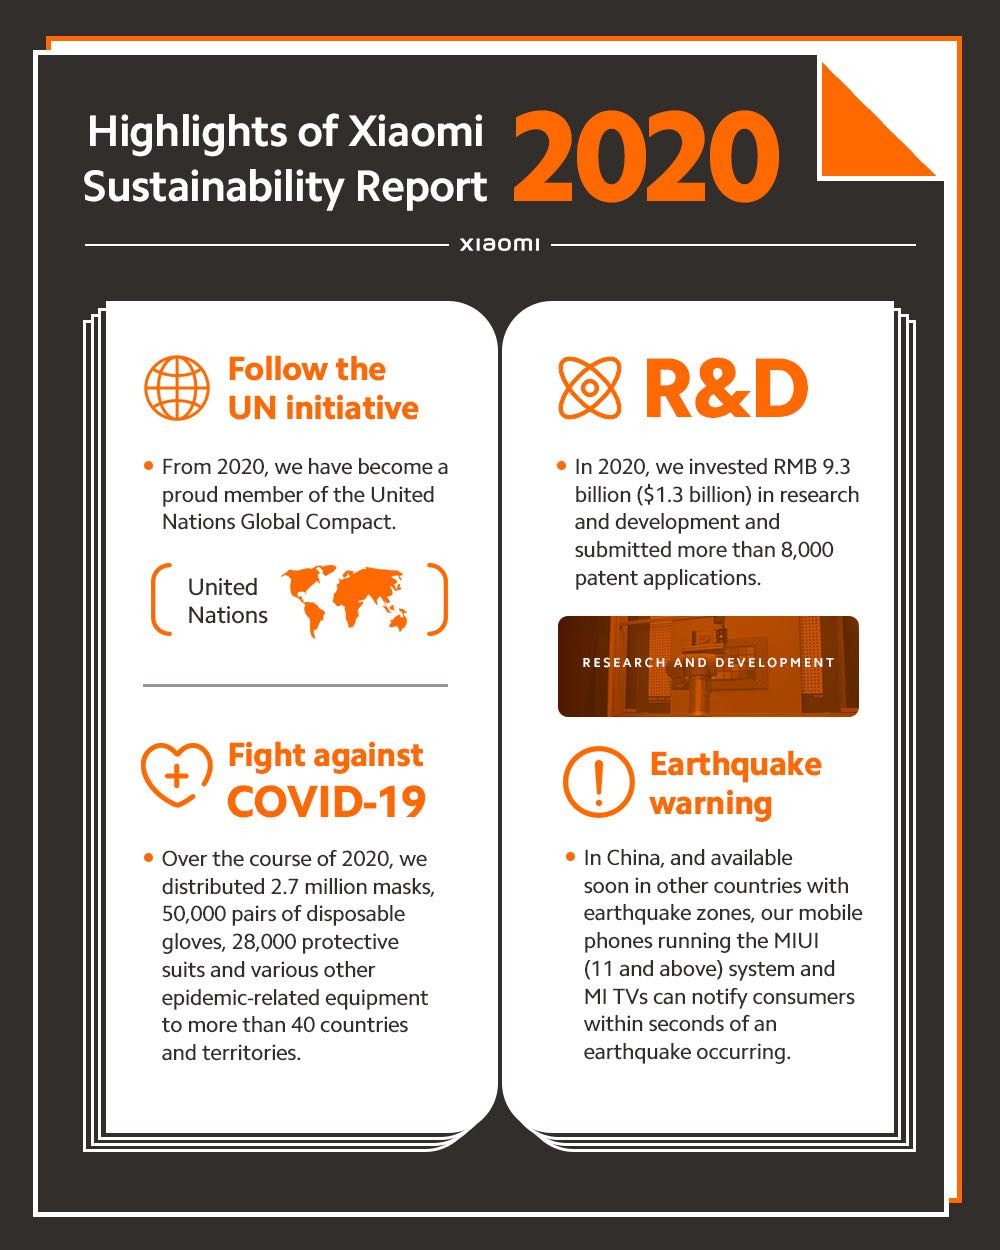 Xiaomi publishes its Sustainability Report 2020, which covers reducing waste, fighting COVID-19